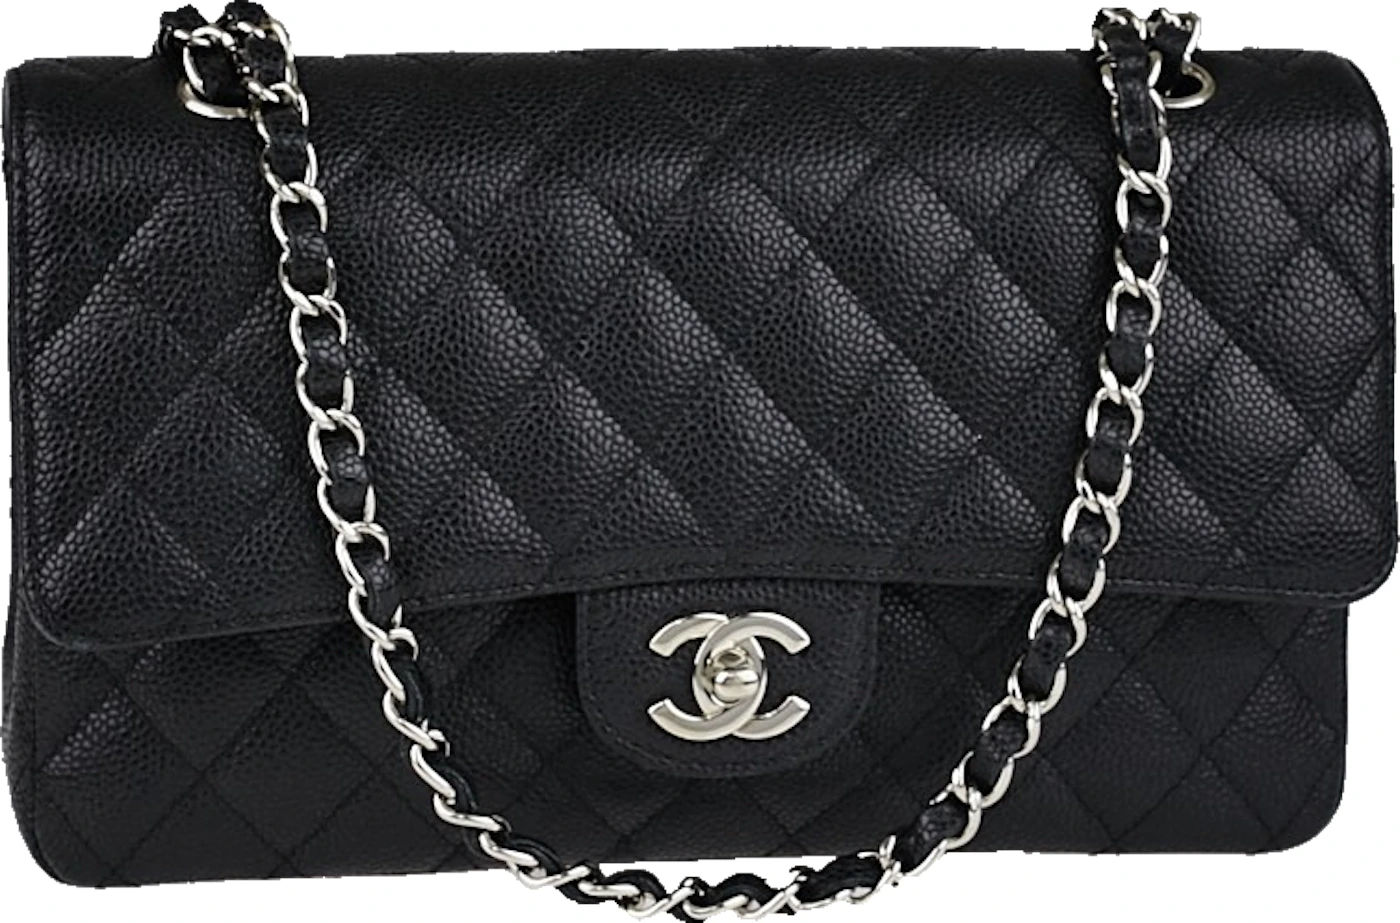 Vintage and Musthaves. Chanel medium/large 2.55 timeless classic single  flap bag